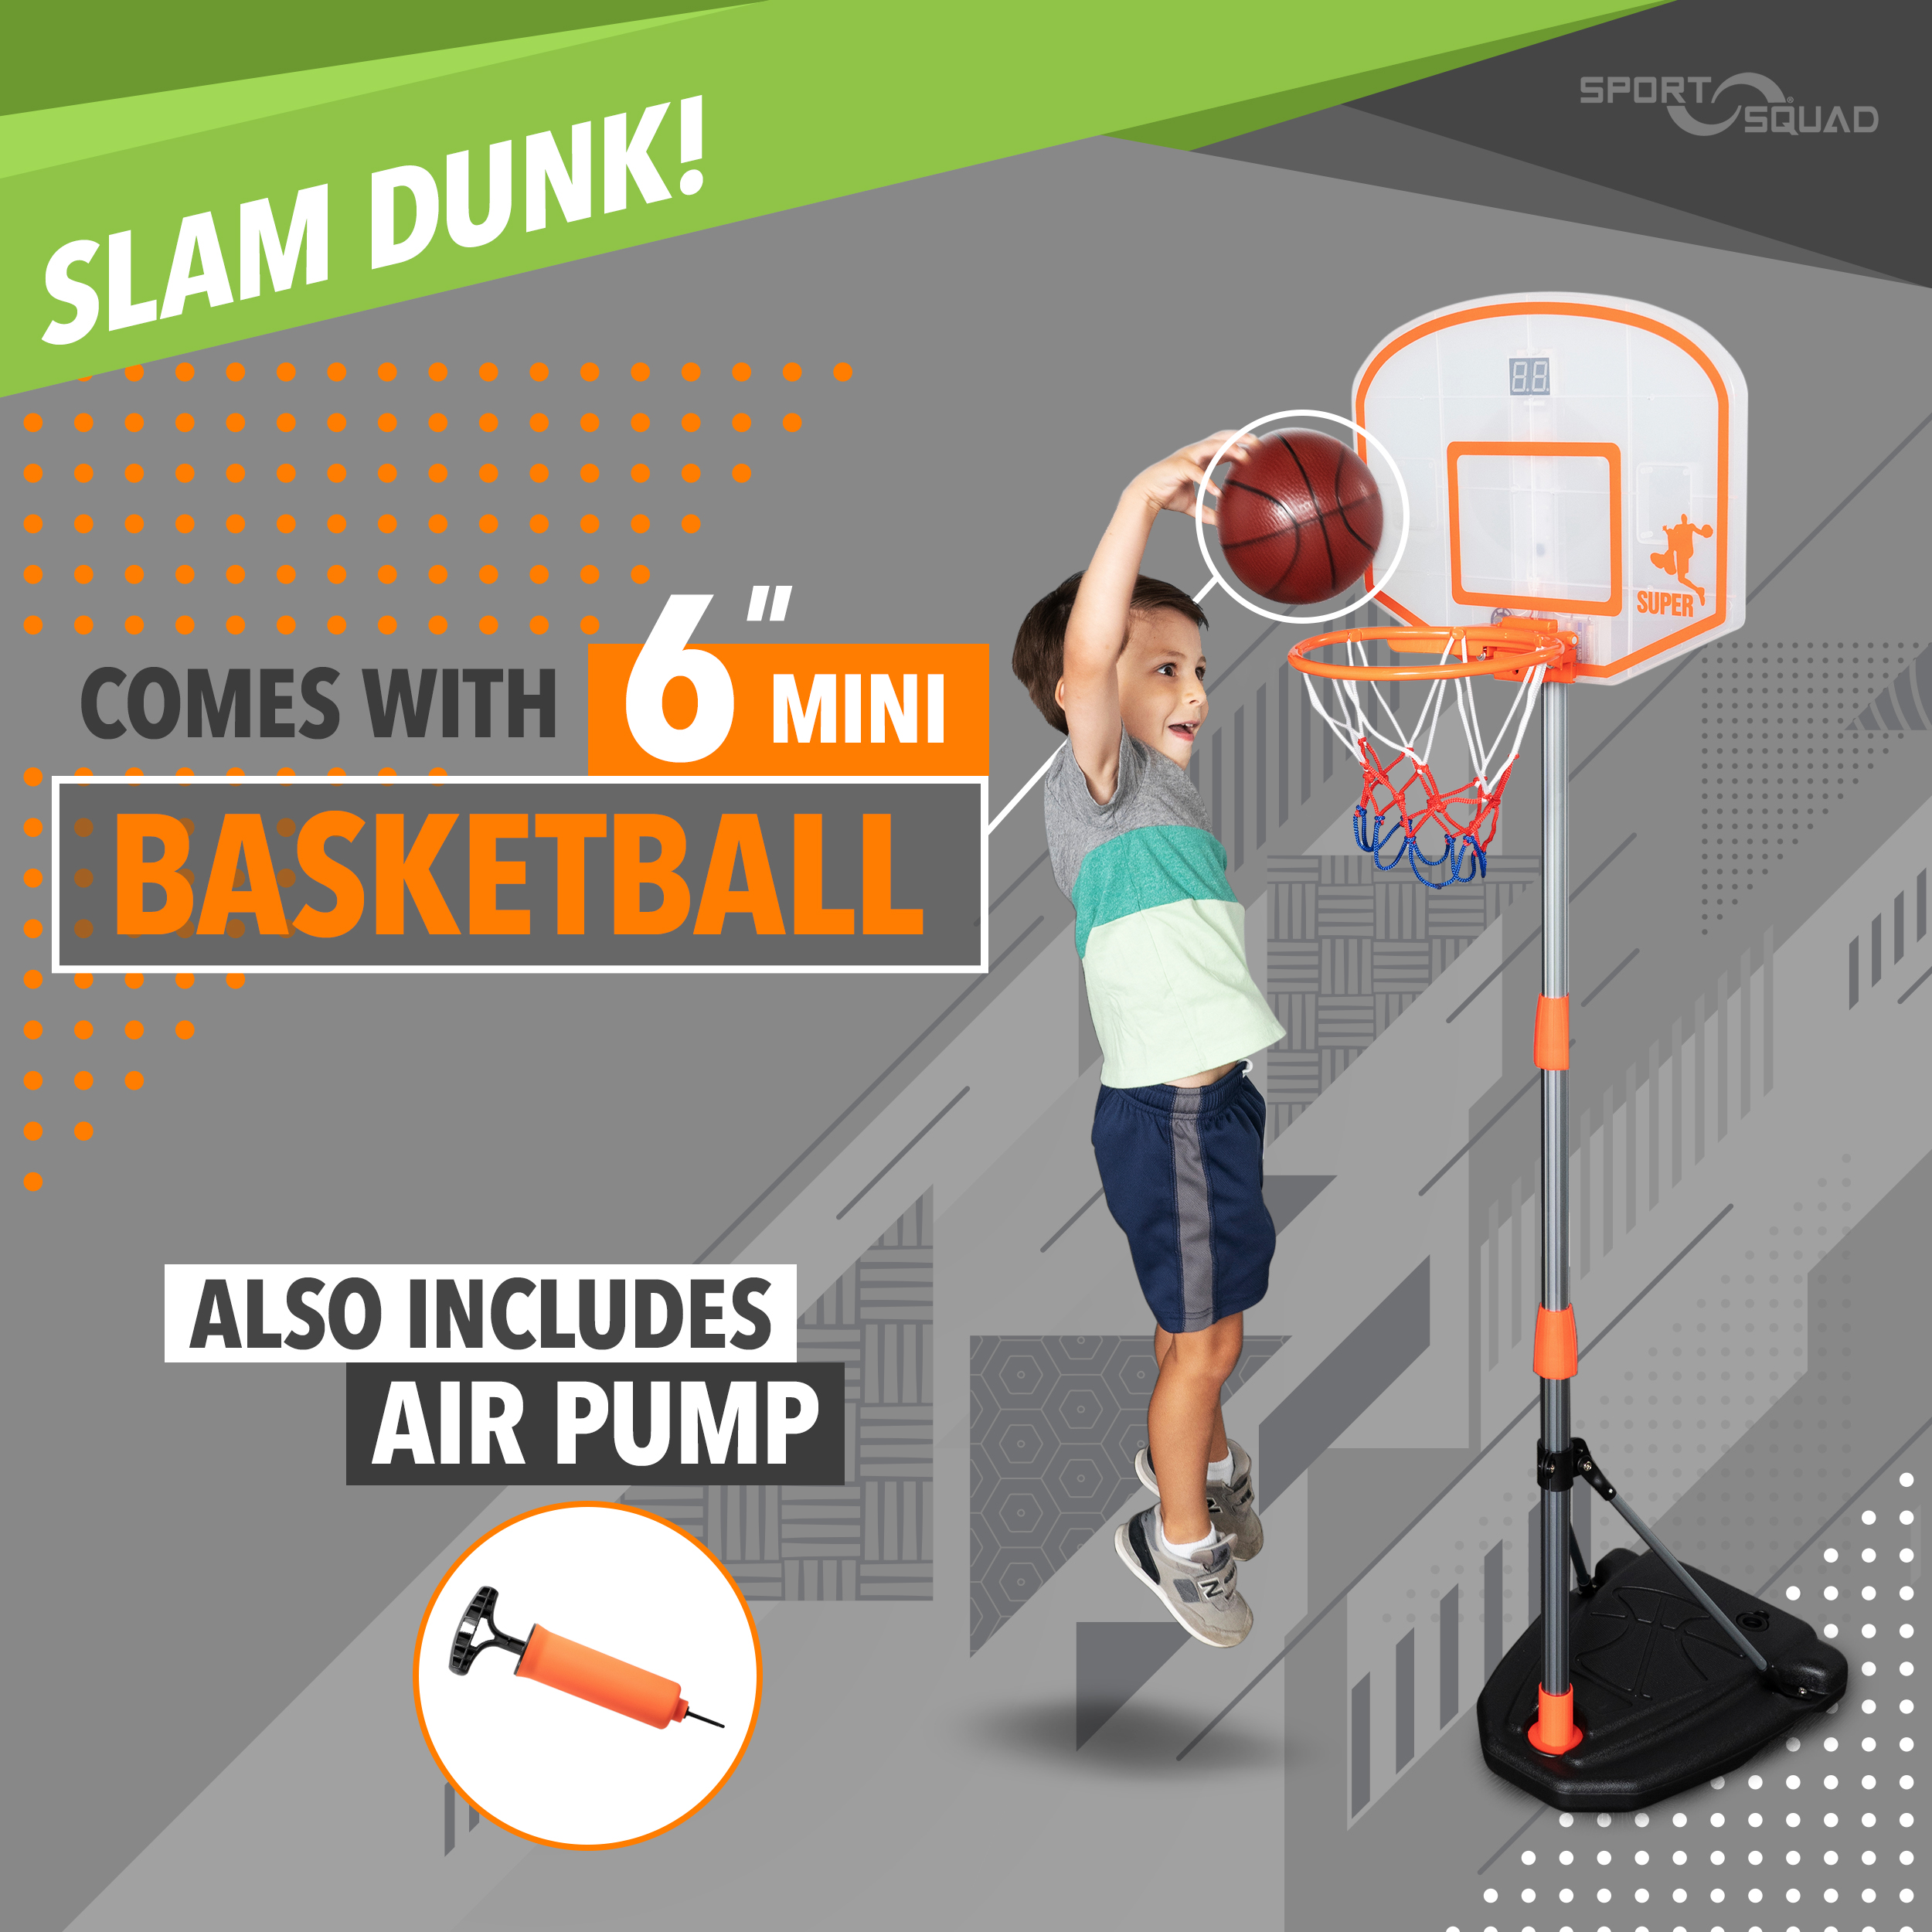 Sport Squad Jumpshot Mini Electronic Arcade Basketball Game with Light Up Basketball, 5.5' Basketball Hoop, 1ct Basketball, 1ct Air Pump - image 4 of 6